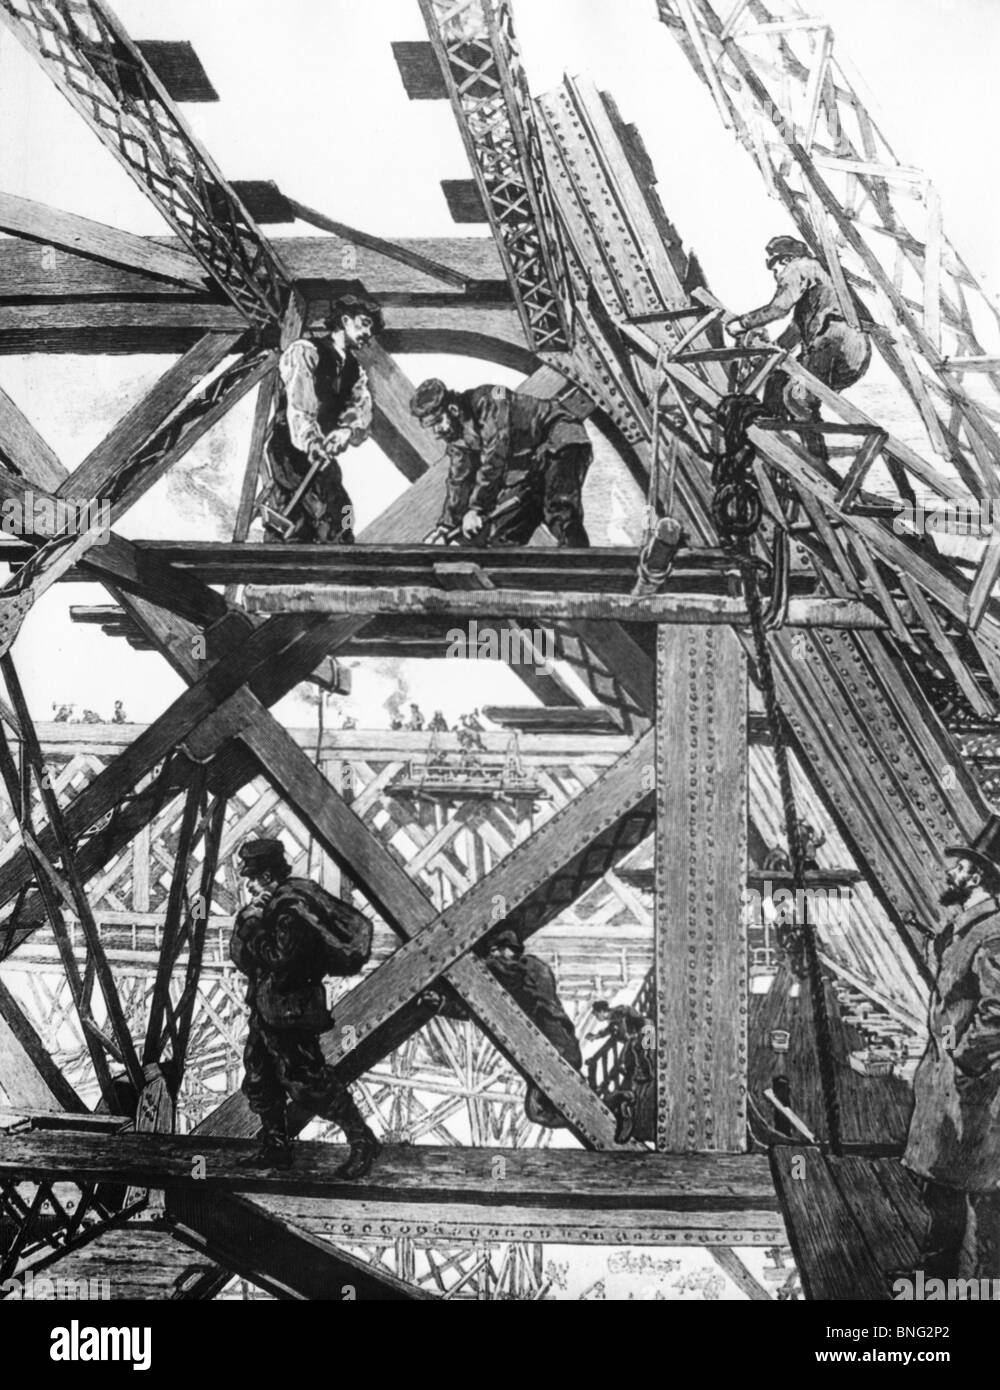 Construction Under Progress: Tower for the Paris Exhibition by unknown artist, 1889 Stock Photo